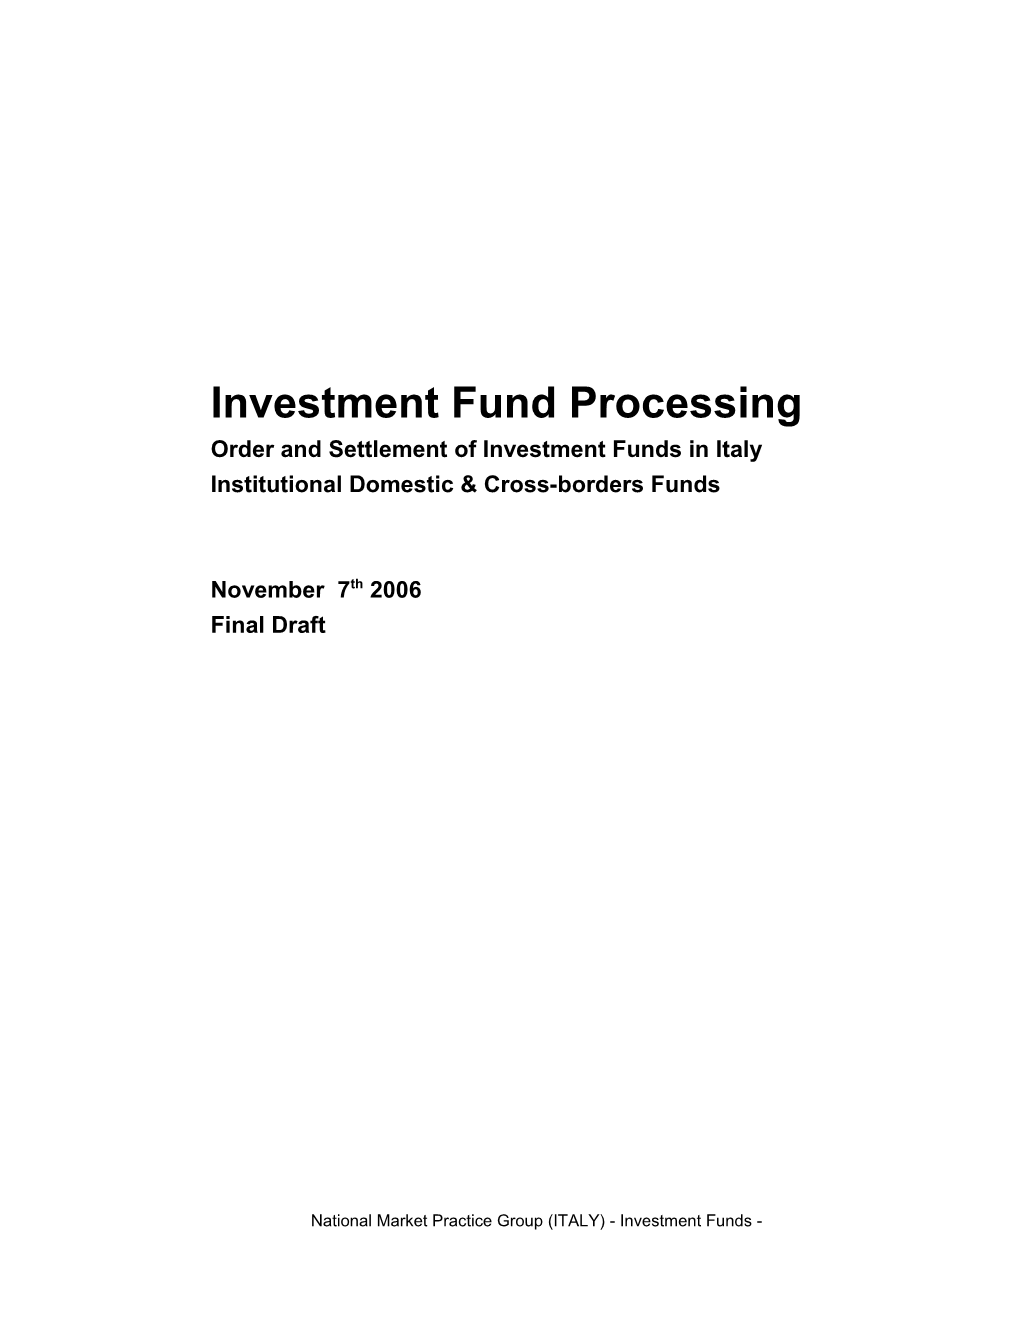 Order and Settlementof Investment Funds in Italy